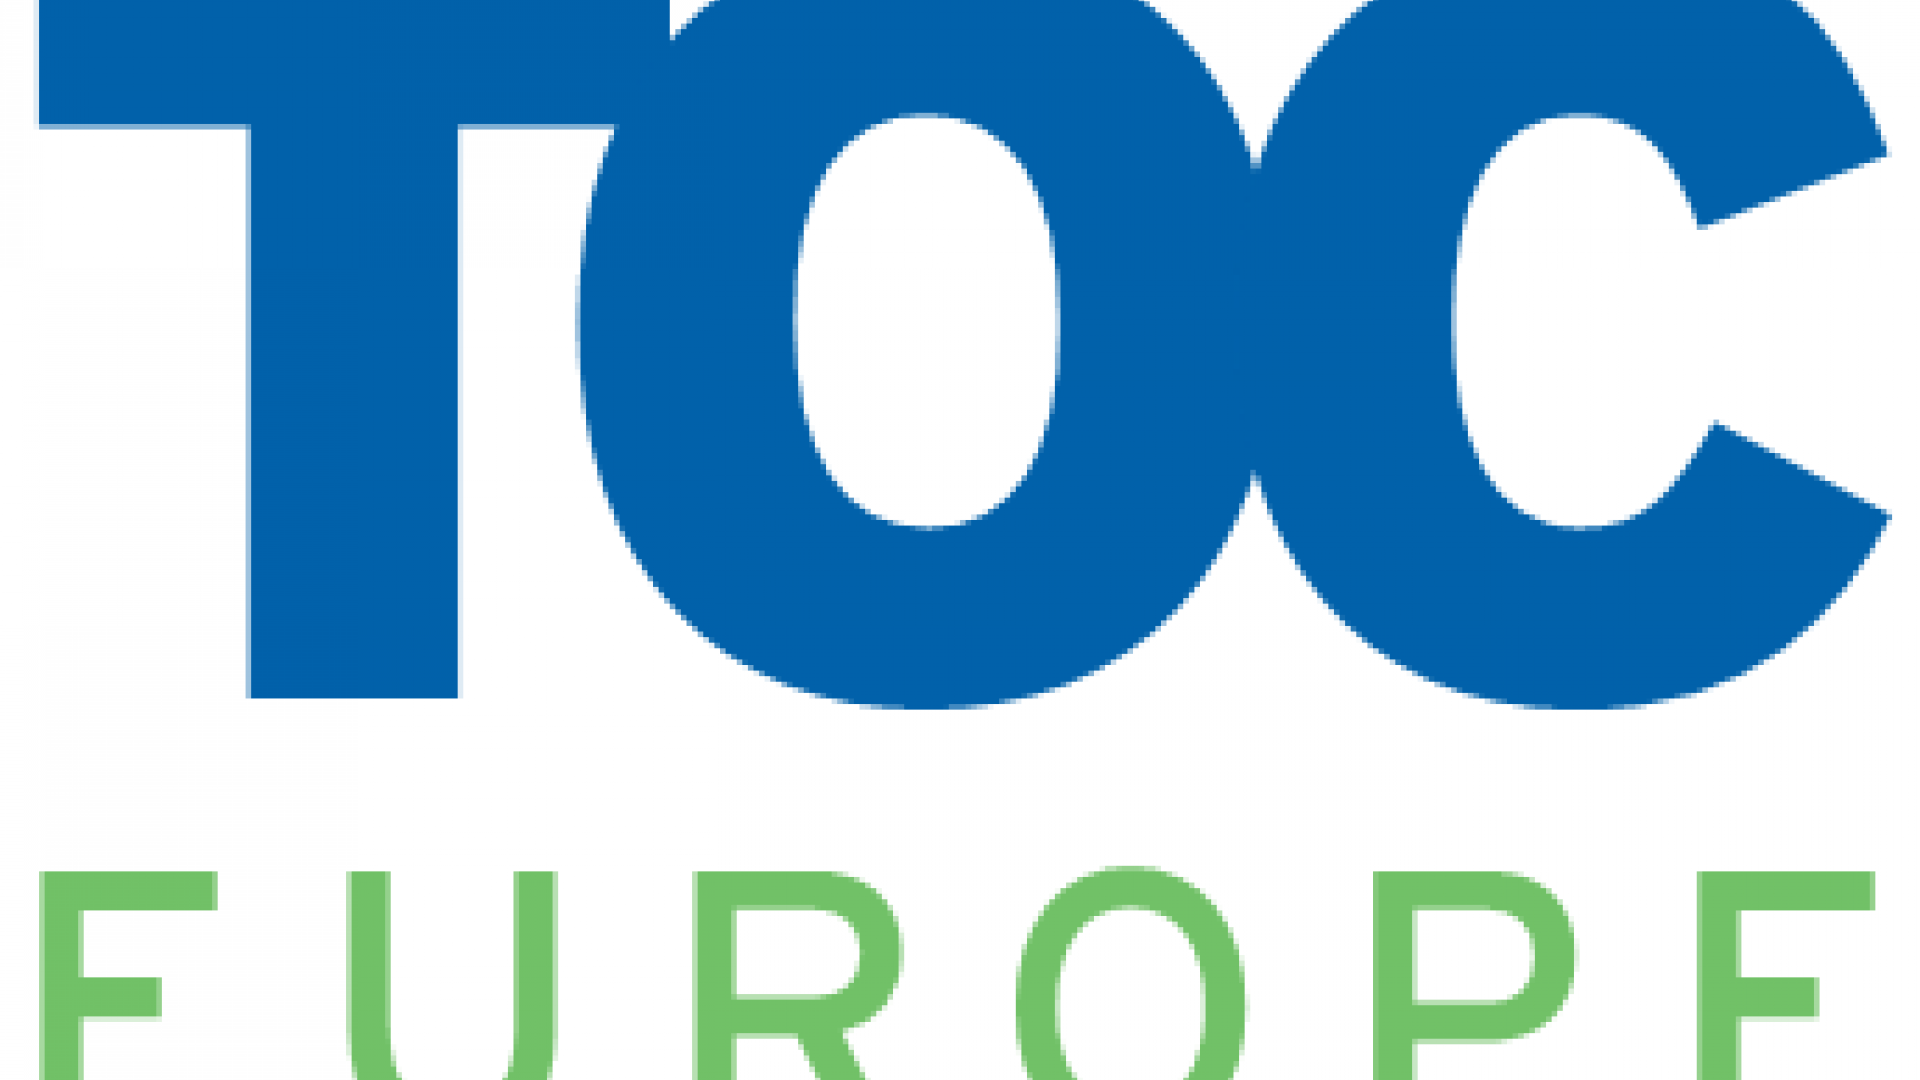 TOC Europe moved to 2021 but again in Rotterdam!